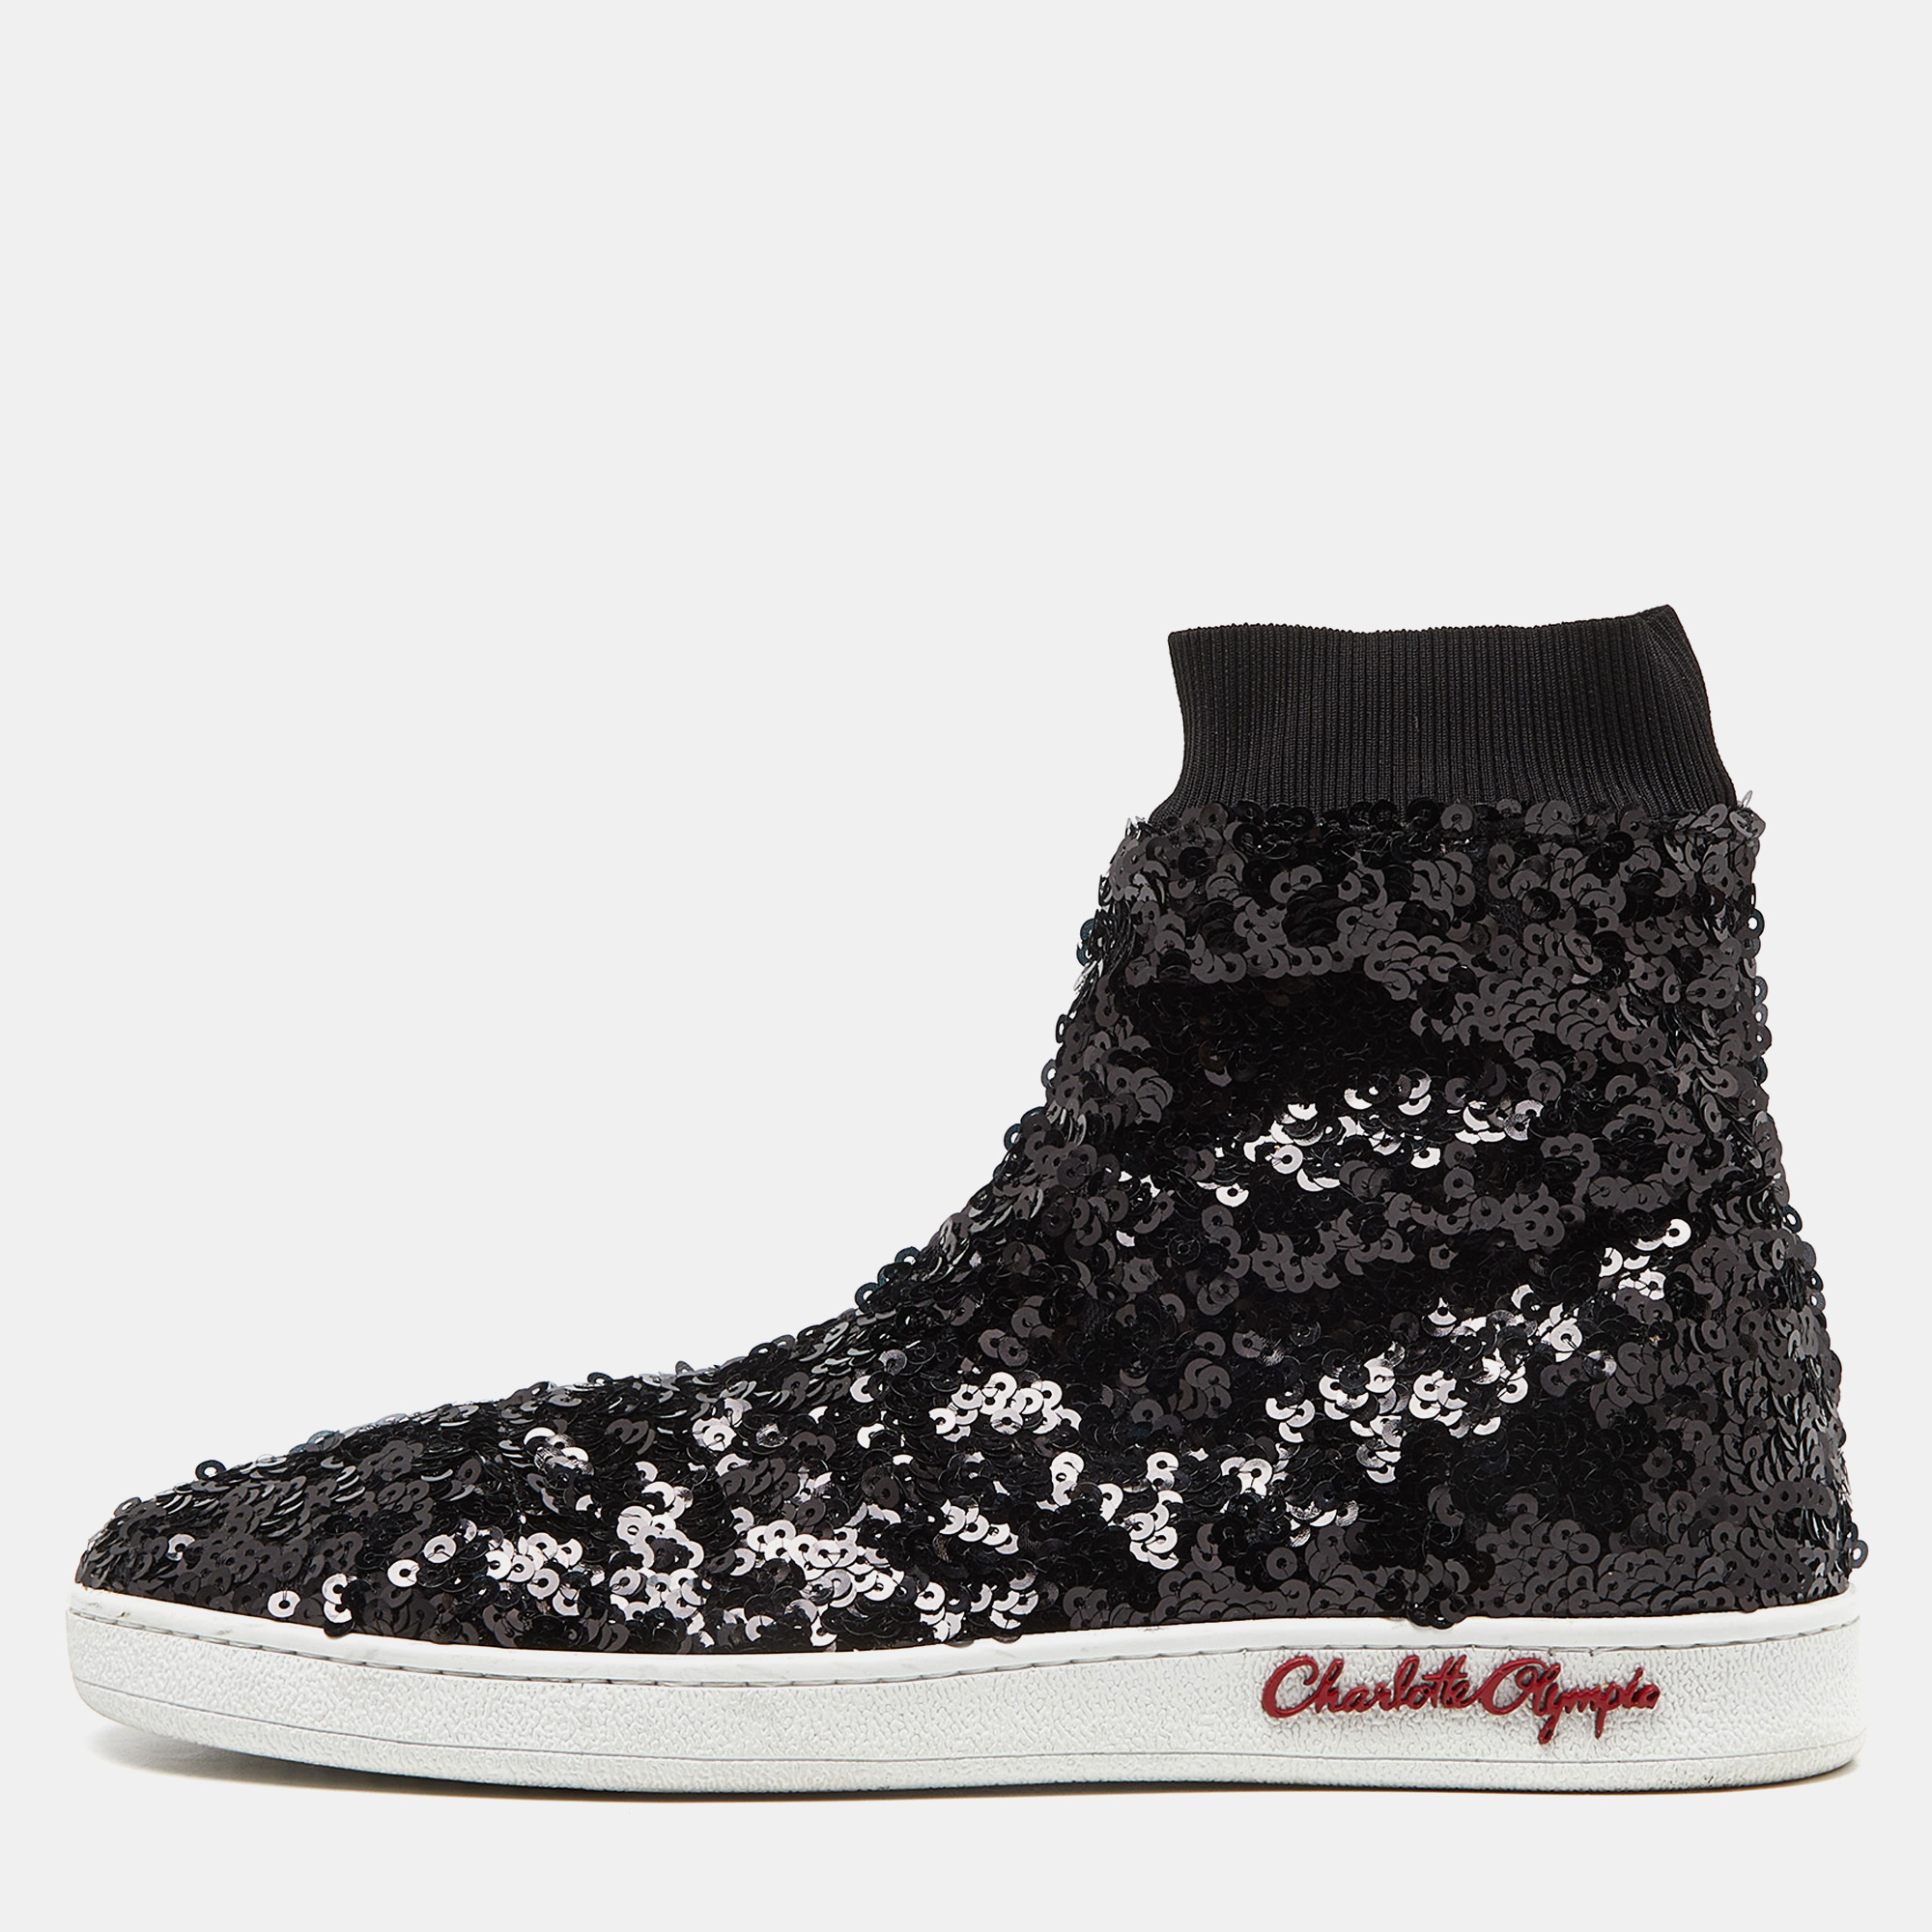 Charlotte olympia black sequin sock sneakers size 39